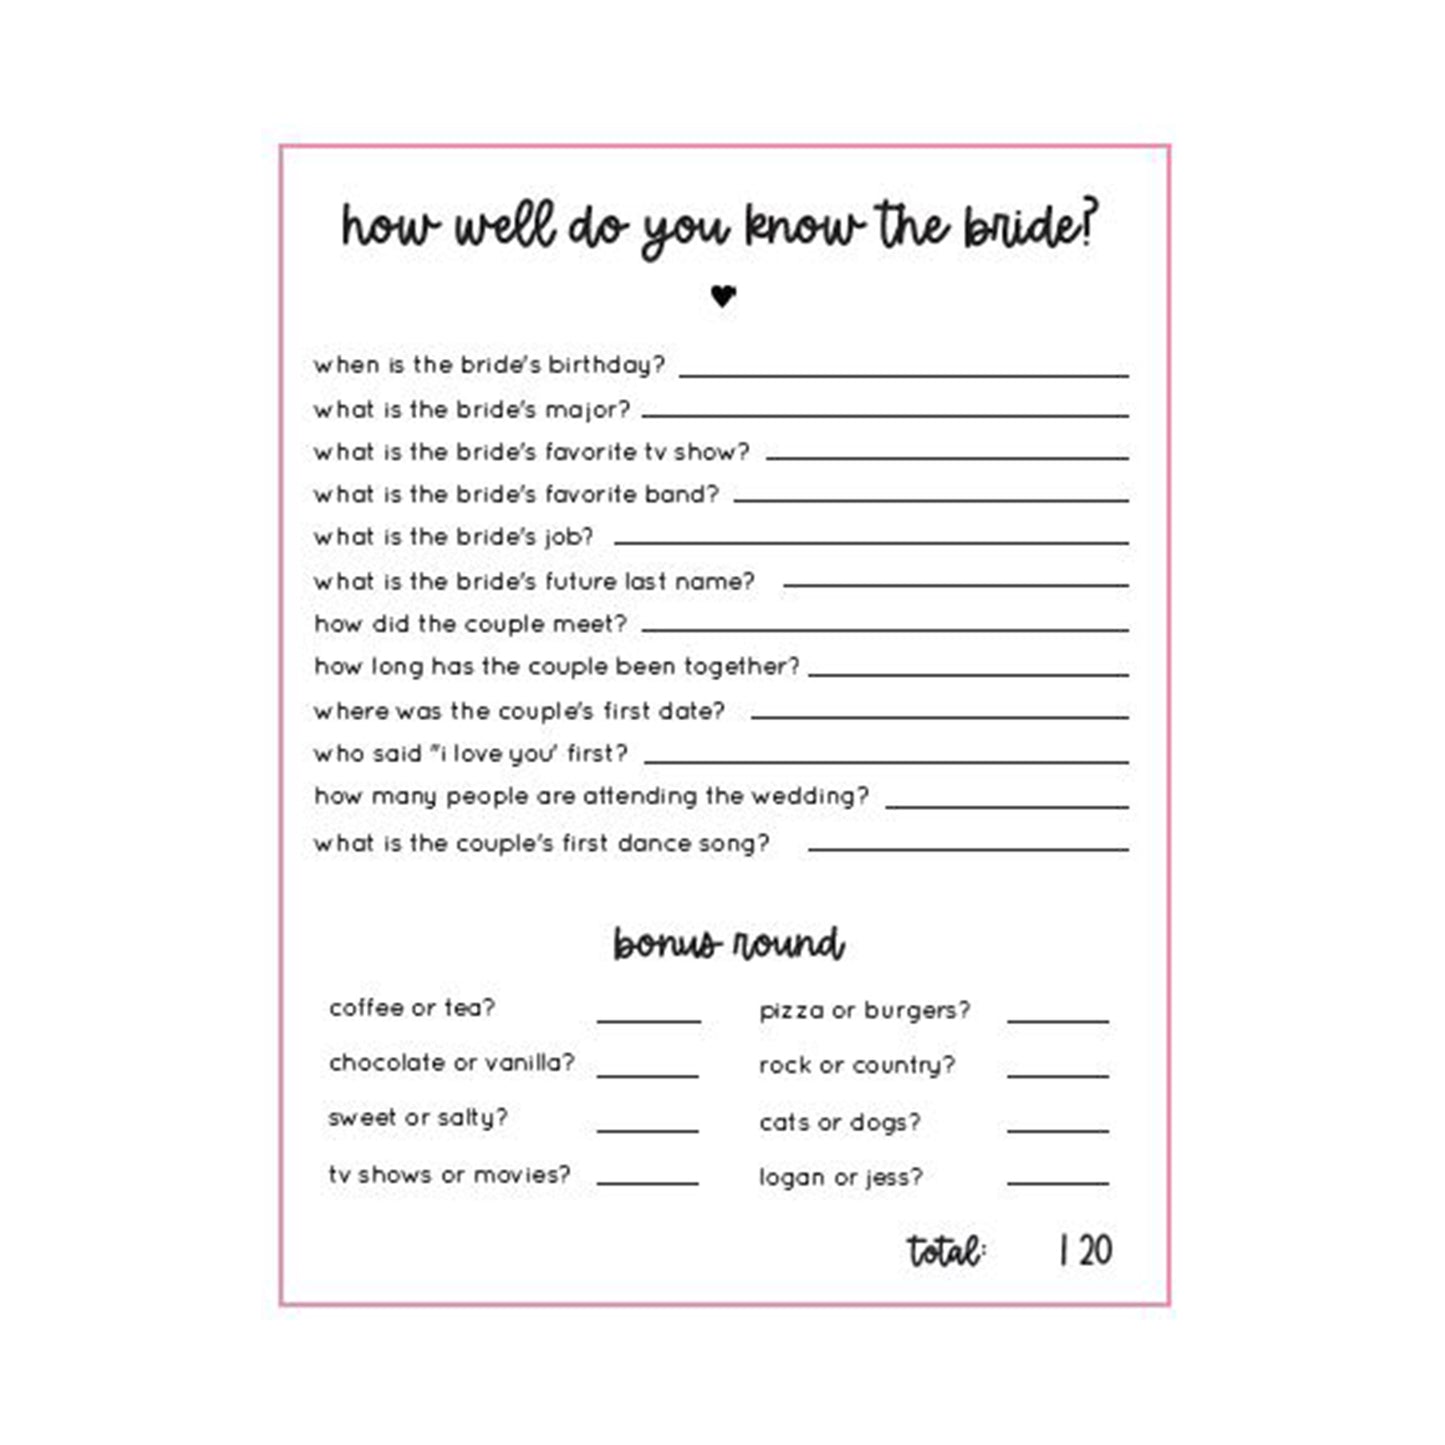 Gilmore Bridal Shower How Well Do You Know Bride Game Printable